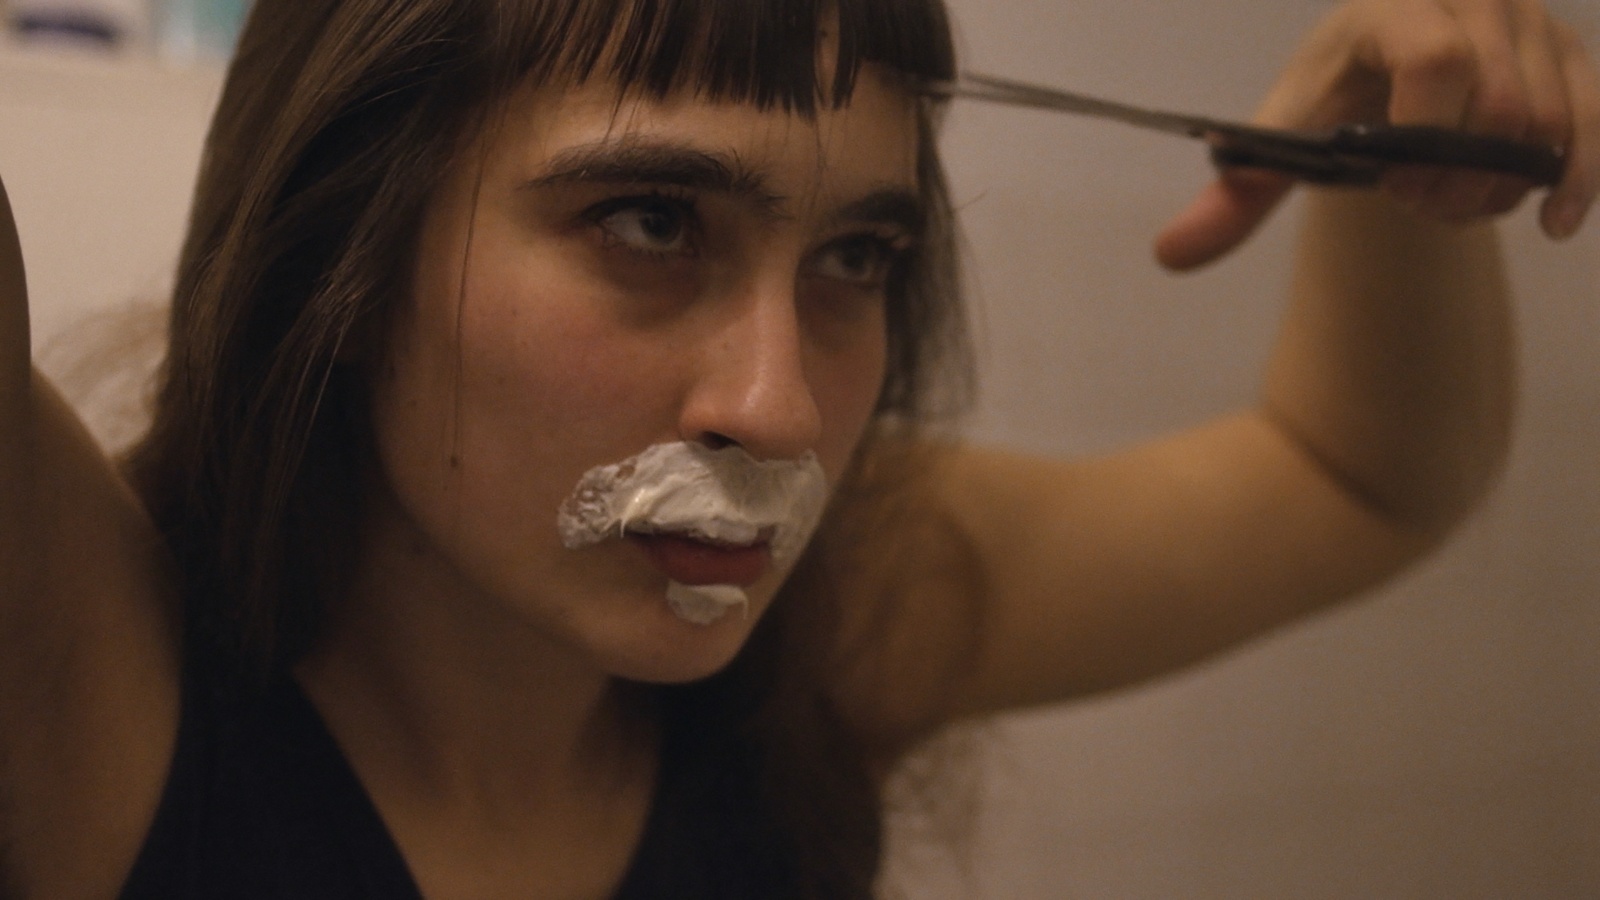 eng: A young woman with a foam mustache cuts her bangs.